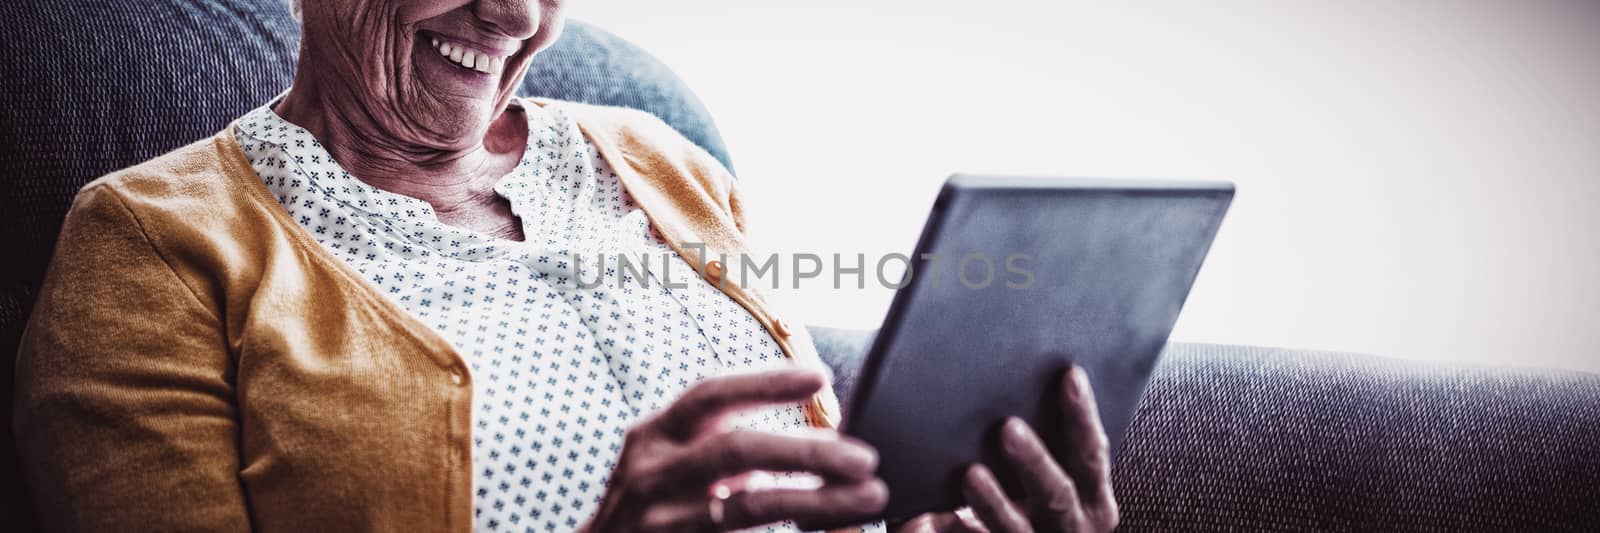 Smiling senior woman looking and laughing at her digital tablet in a sofa